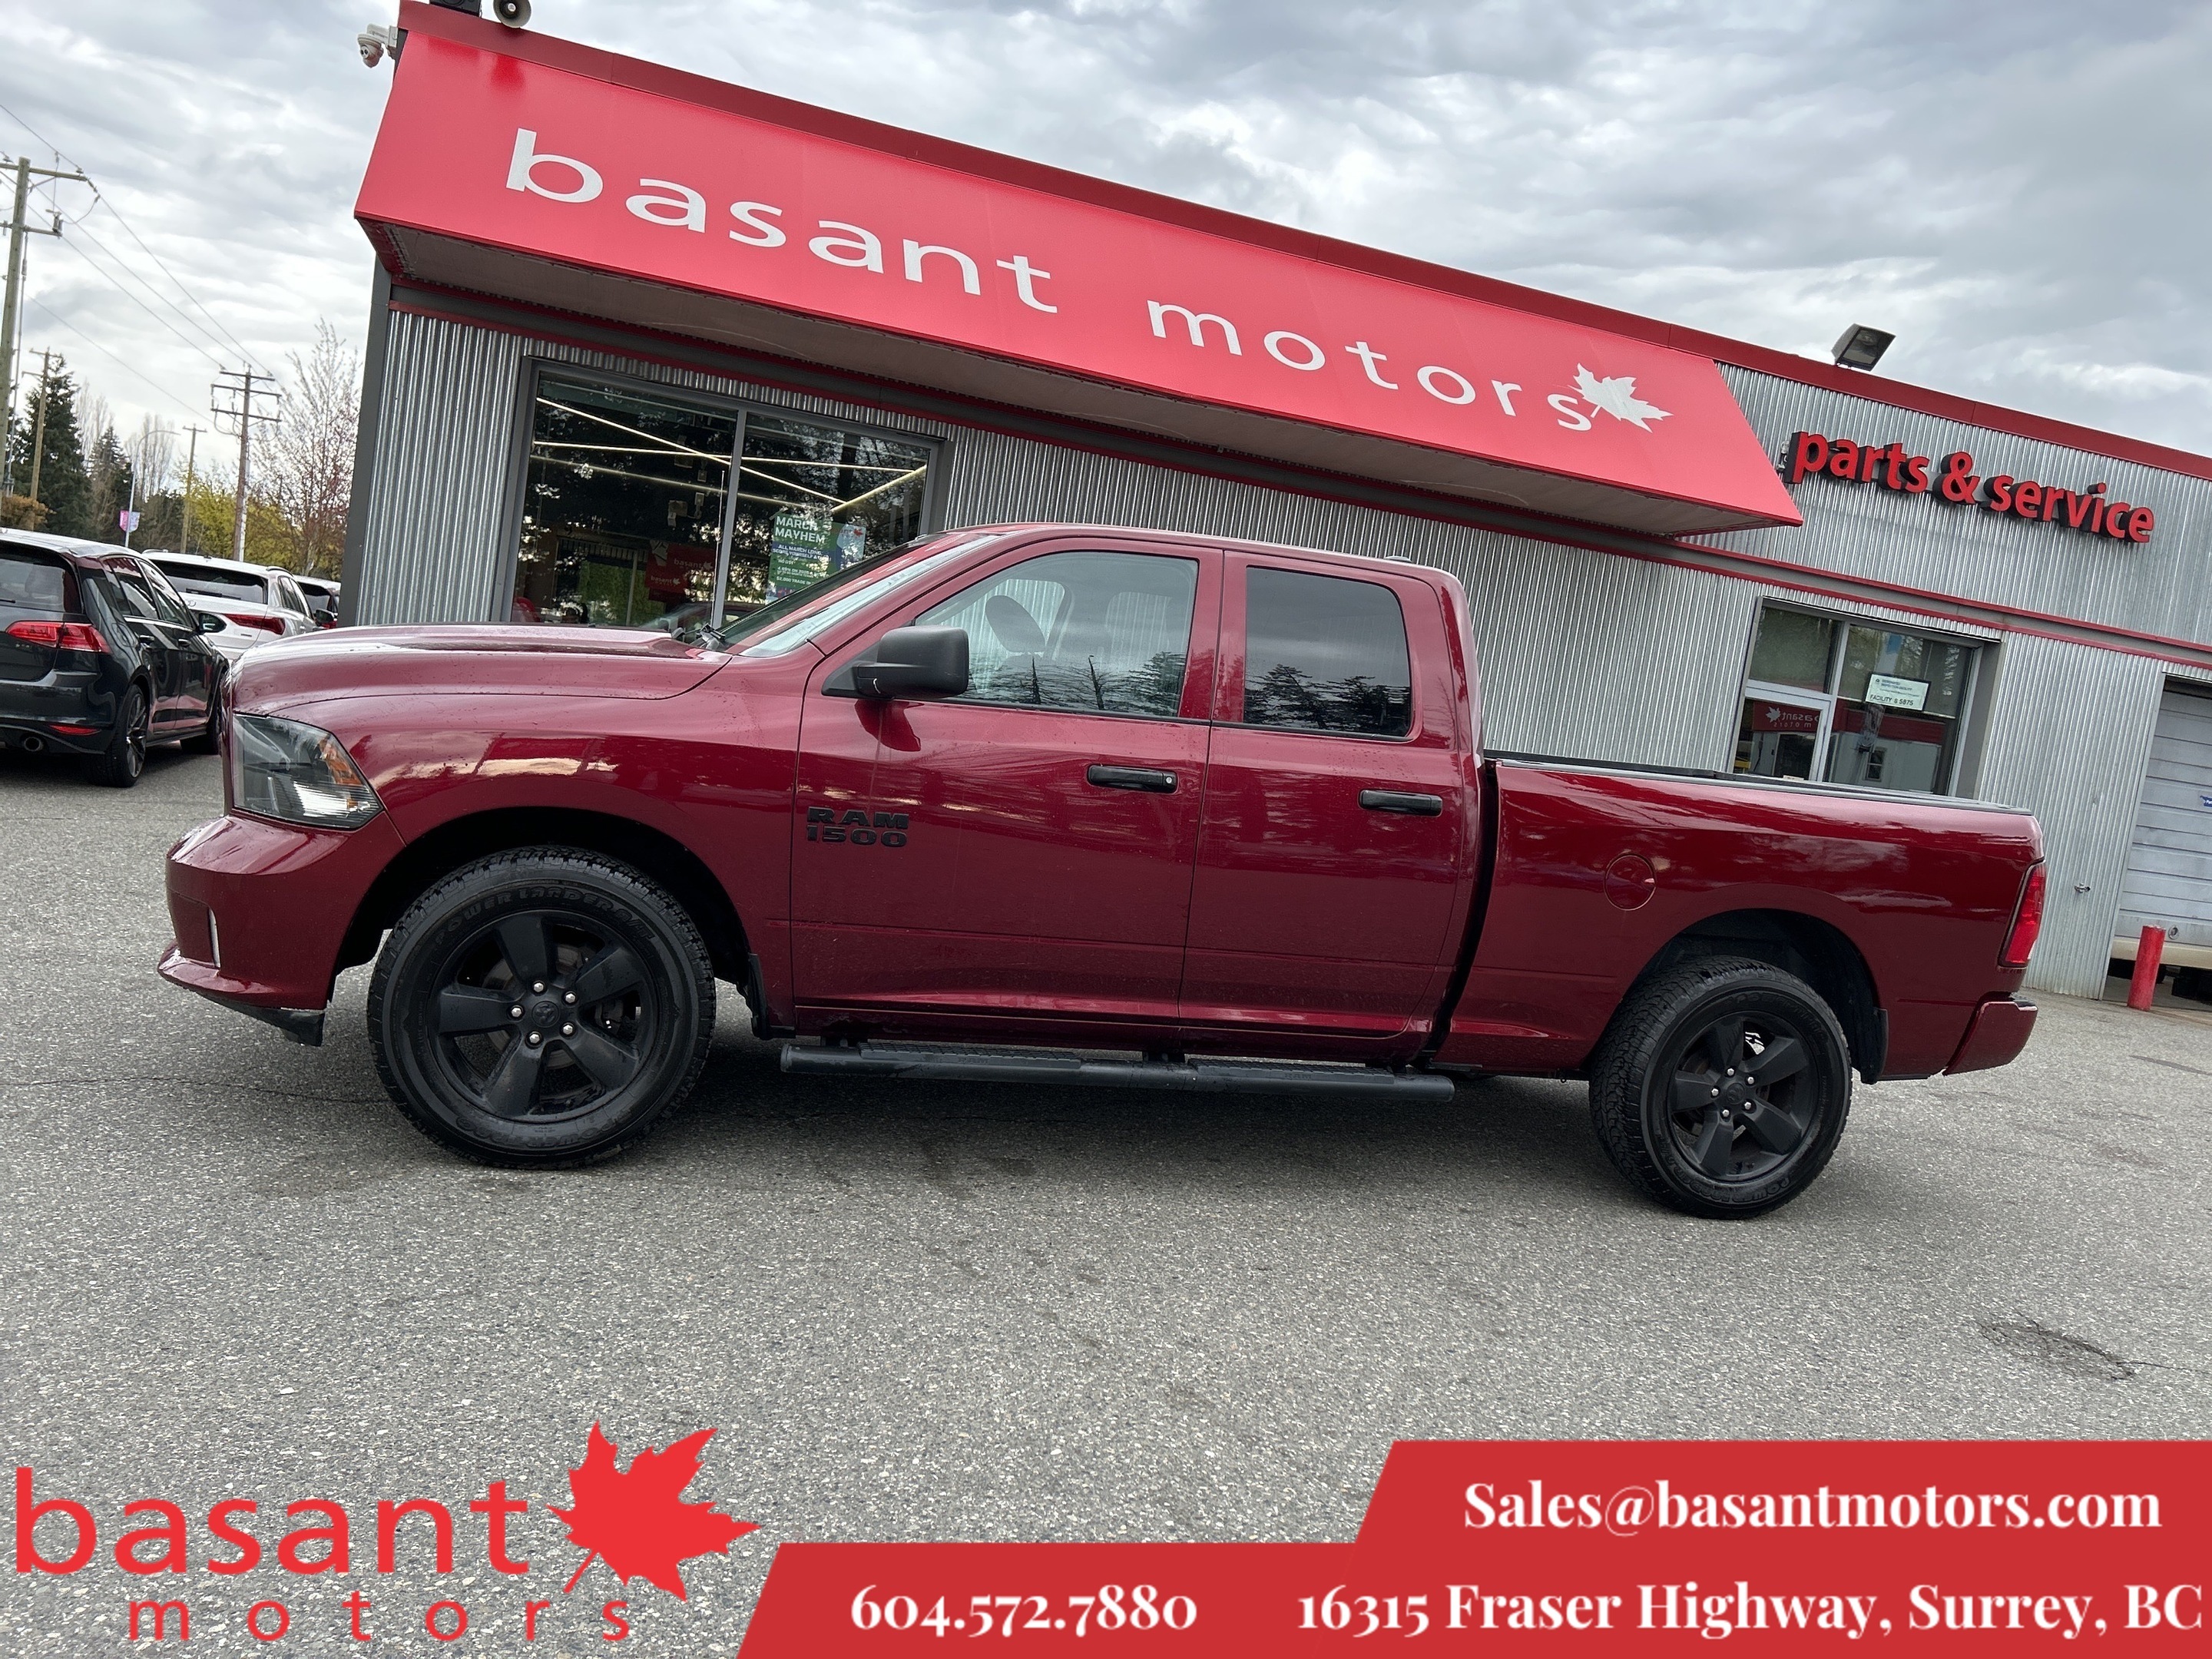 2018 Ram 1500 Express, Low KMs, Backup Cam, Running Boards!